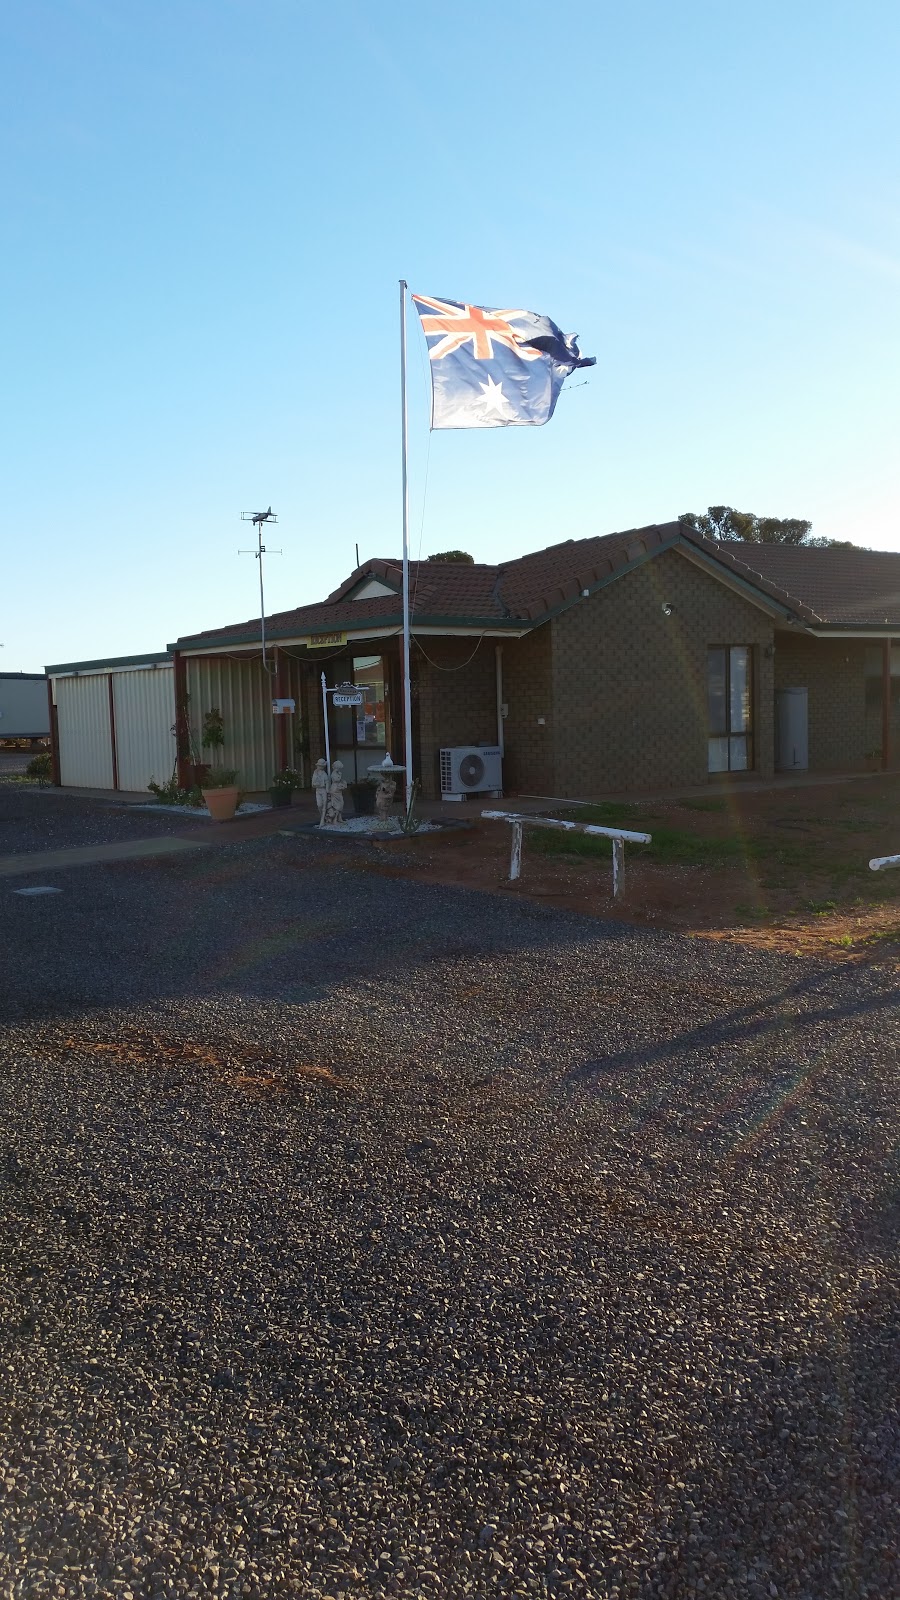 Airport Whyalla Motel | 145 Lincoln Hwy, Whyalla SA 5608, Australia | Phone: (08) 8645 2122